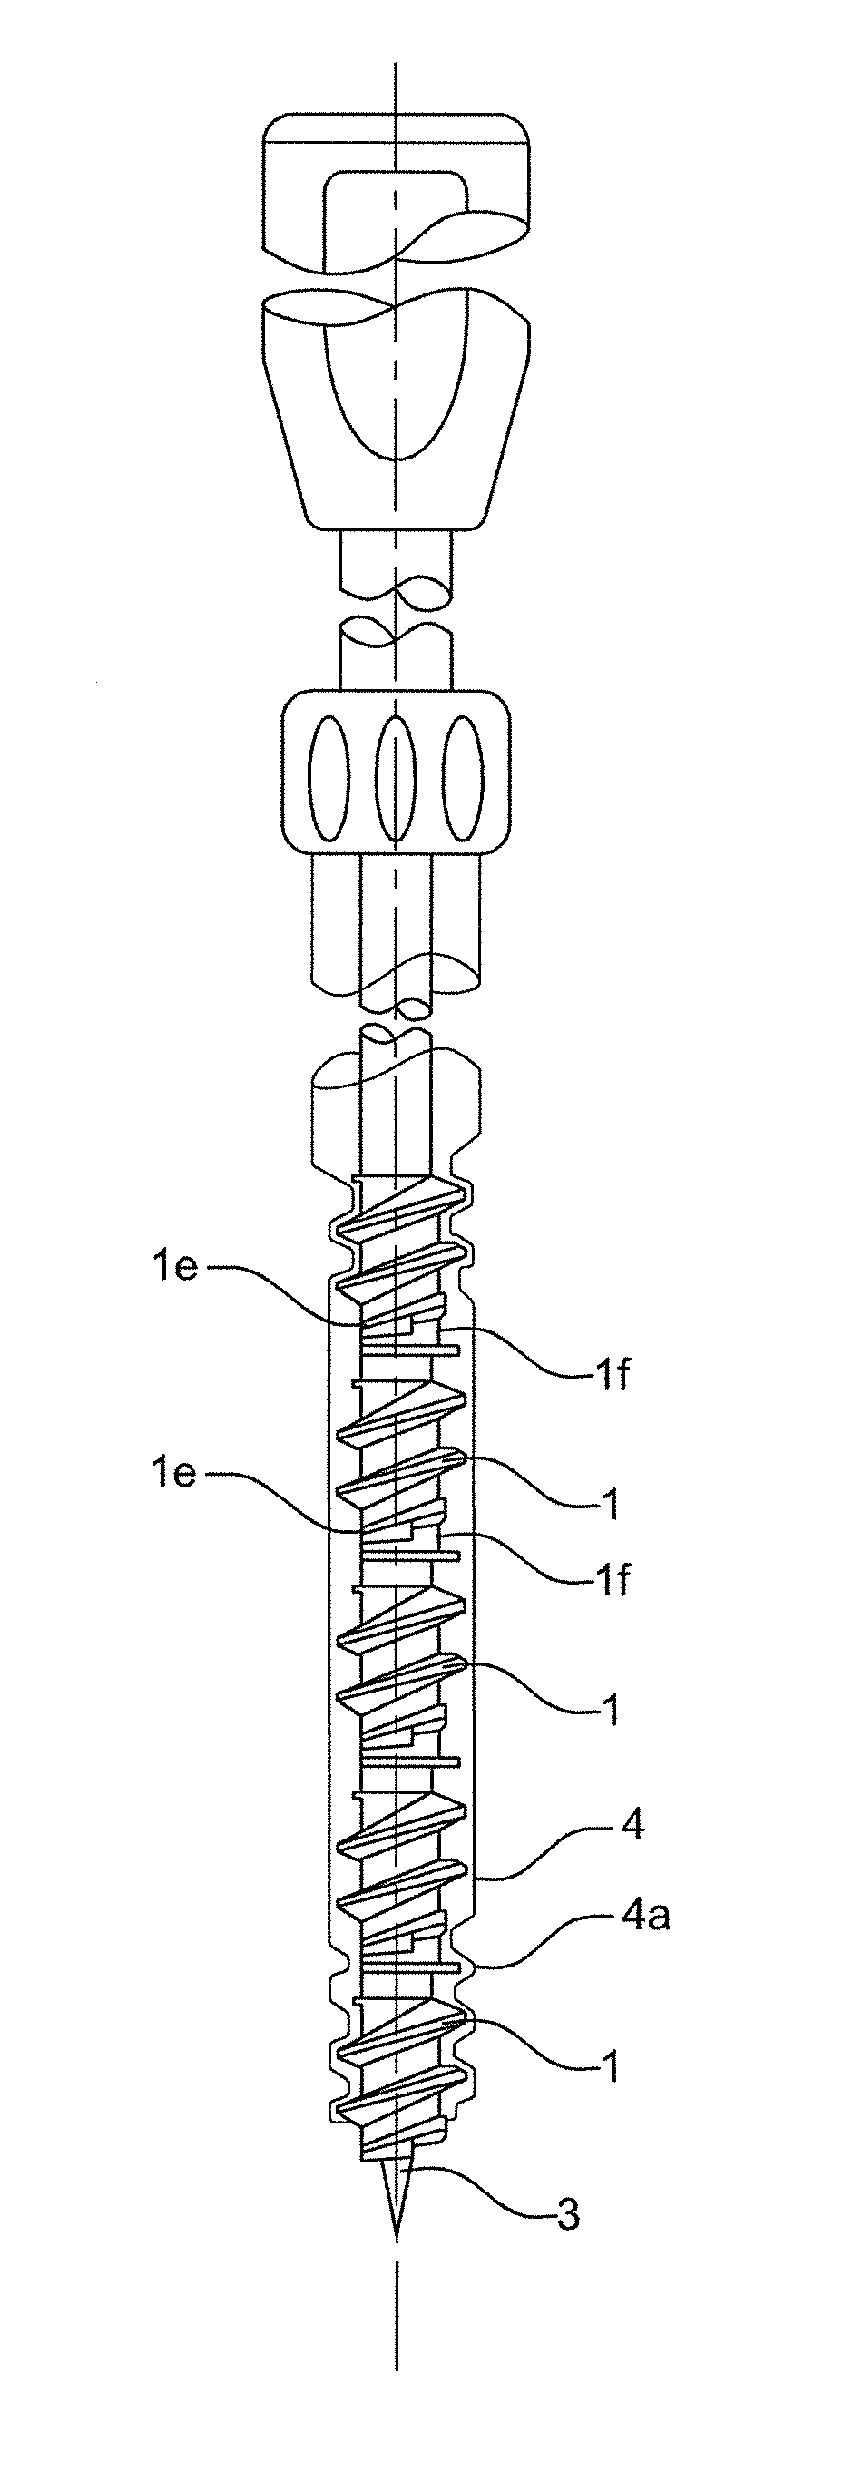 Device comprising a plurality of implants for the fixing of prosthetic material